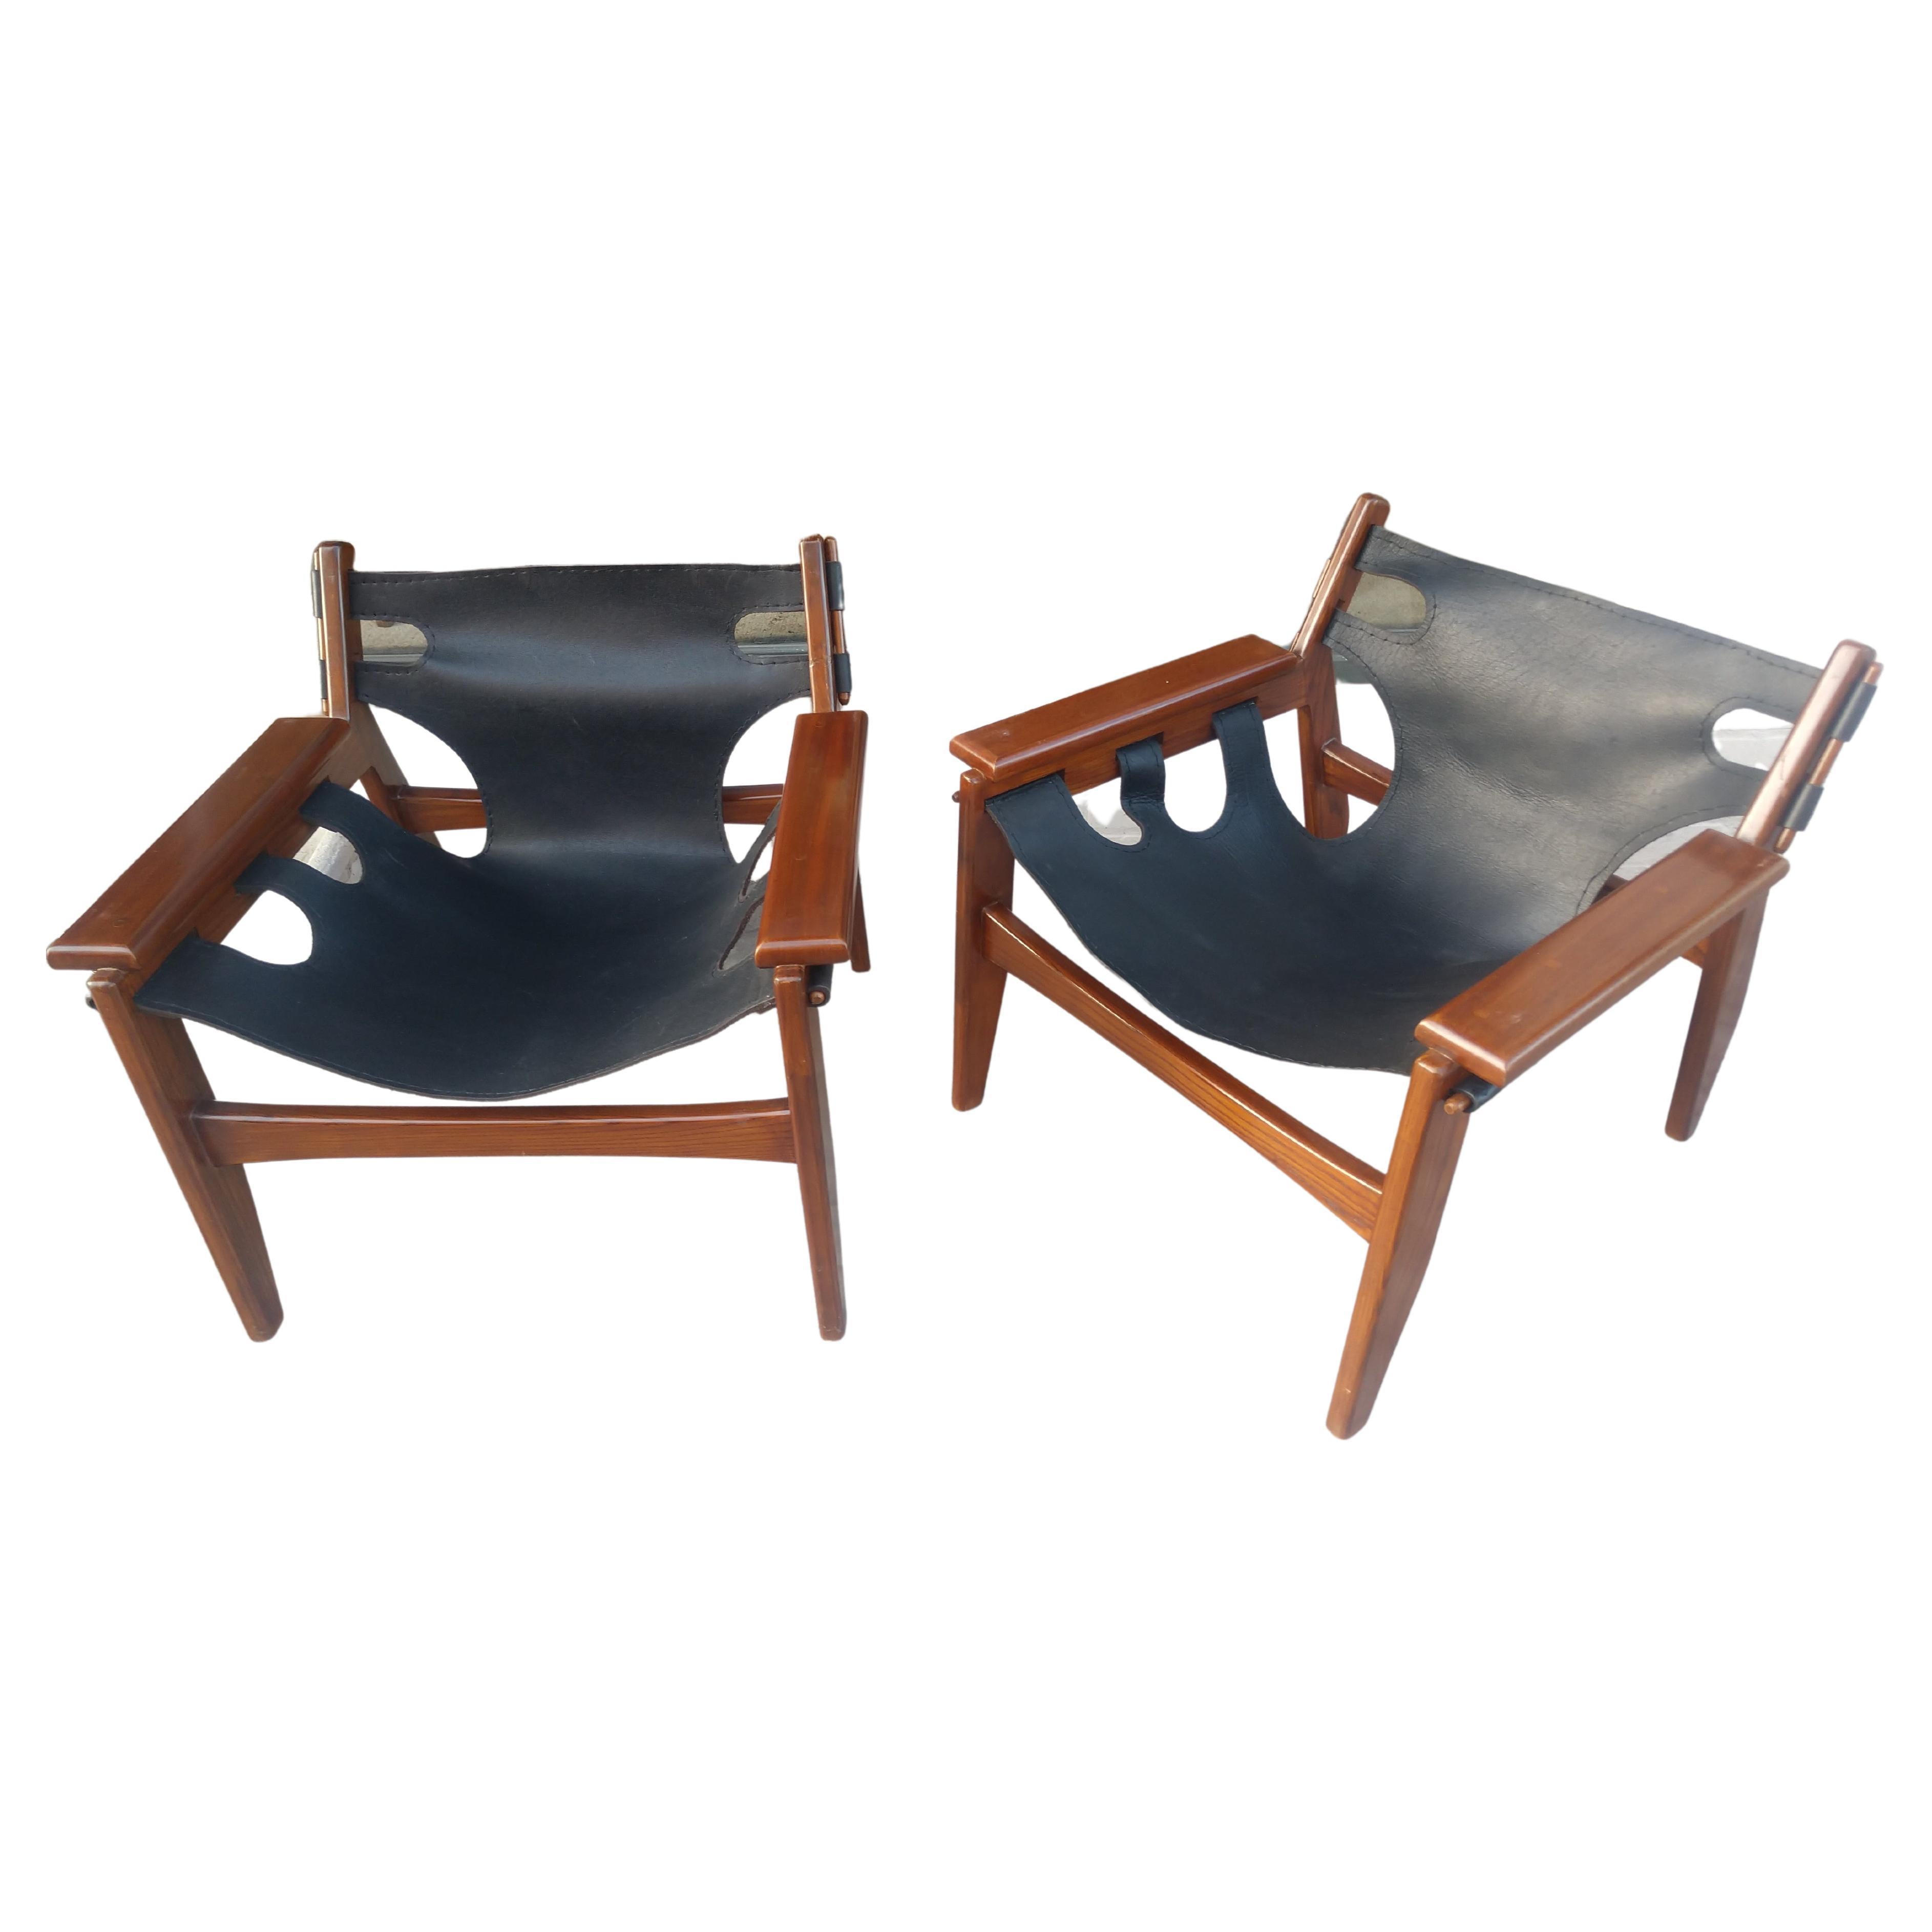 Pair of Mid-Century Modern Leather & Mahogany Sergio Rodrigues Lounge Chairs